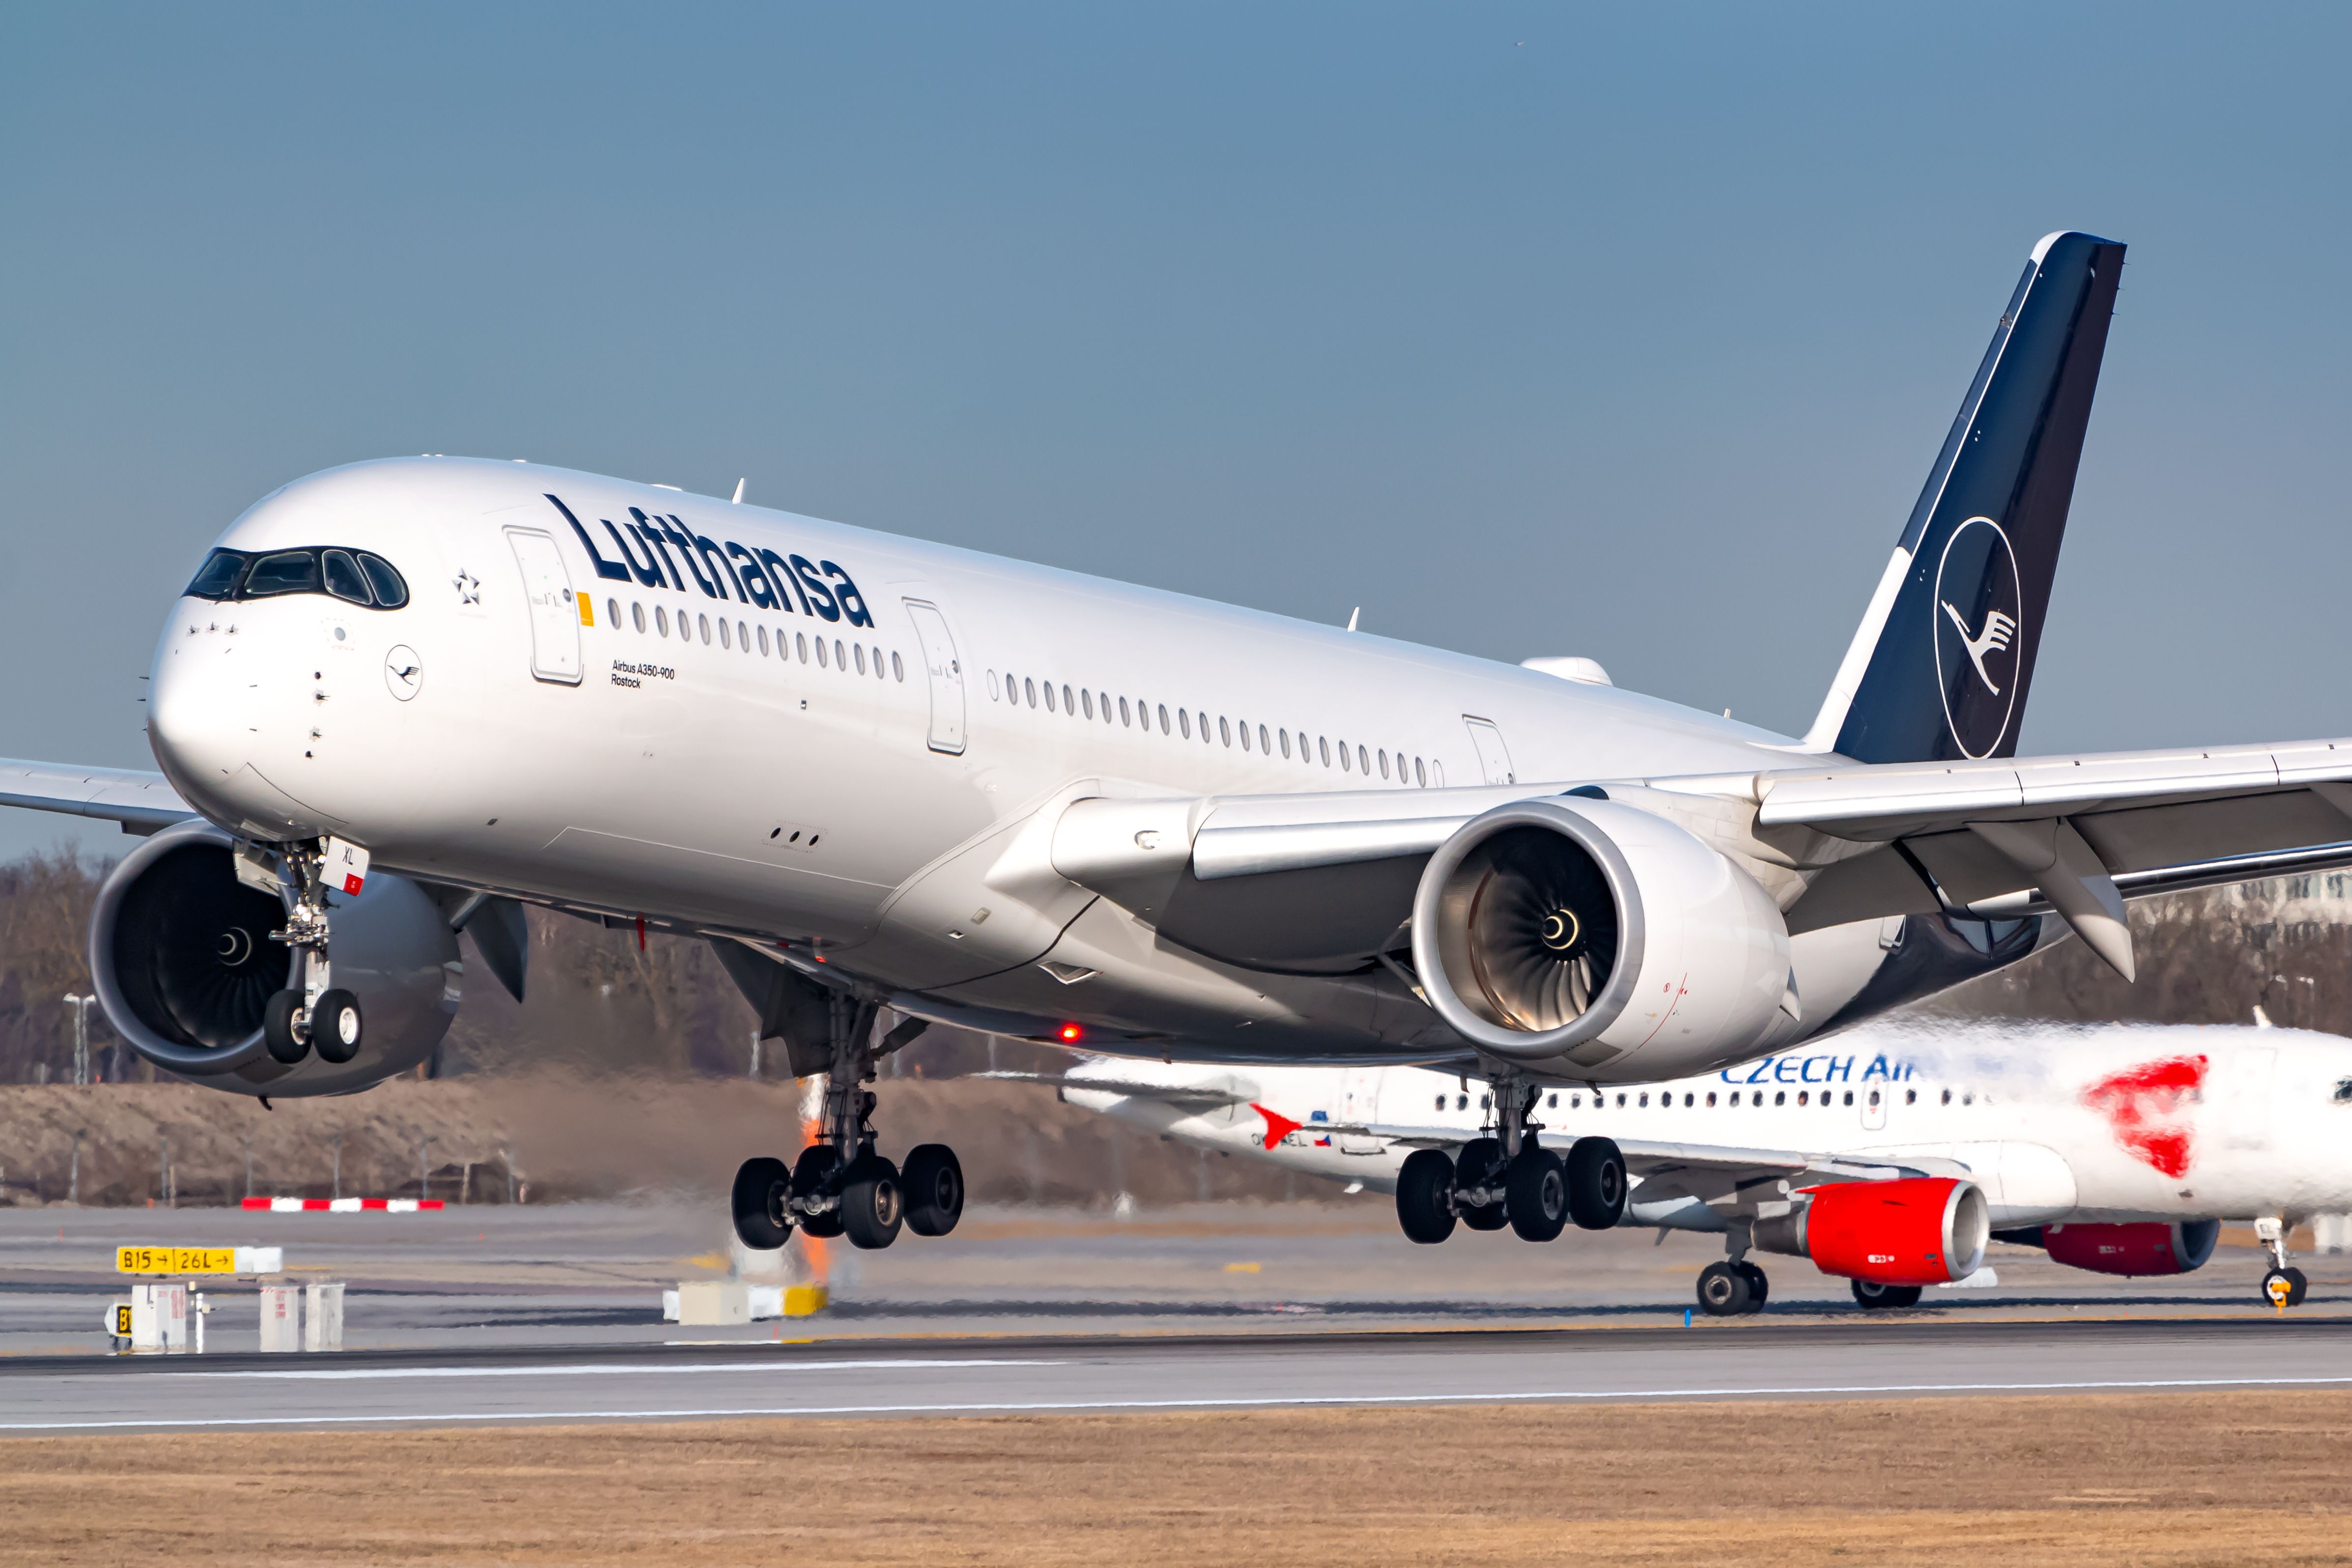 Lufthansa Airbus A350 airplane at Munich airport (MUC) in Germany